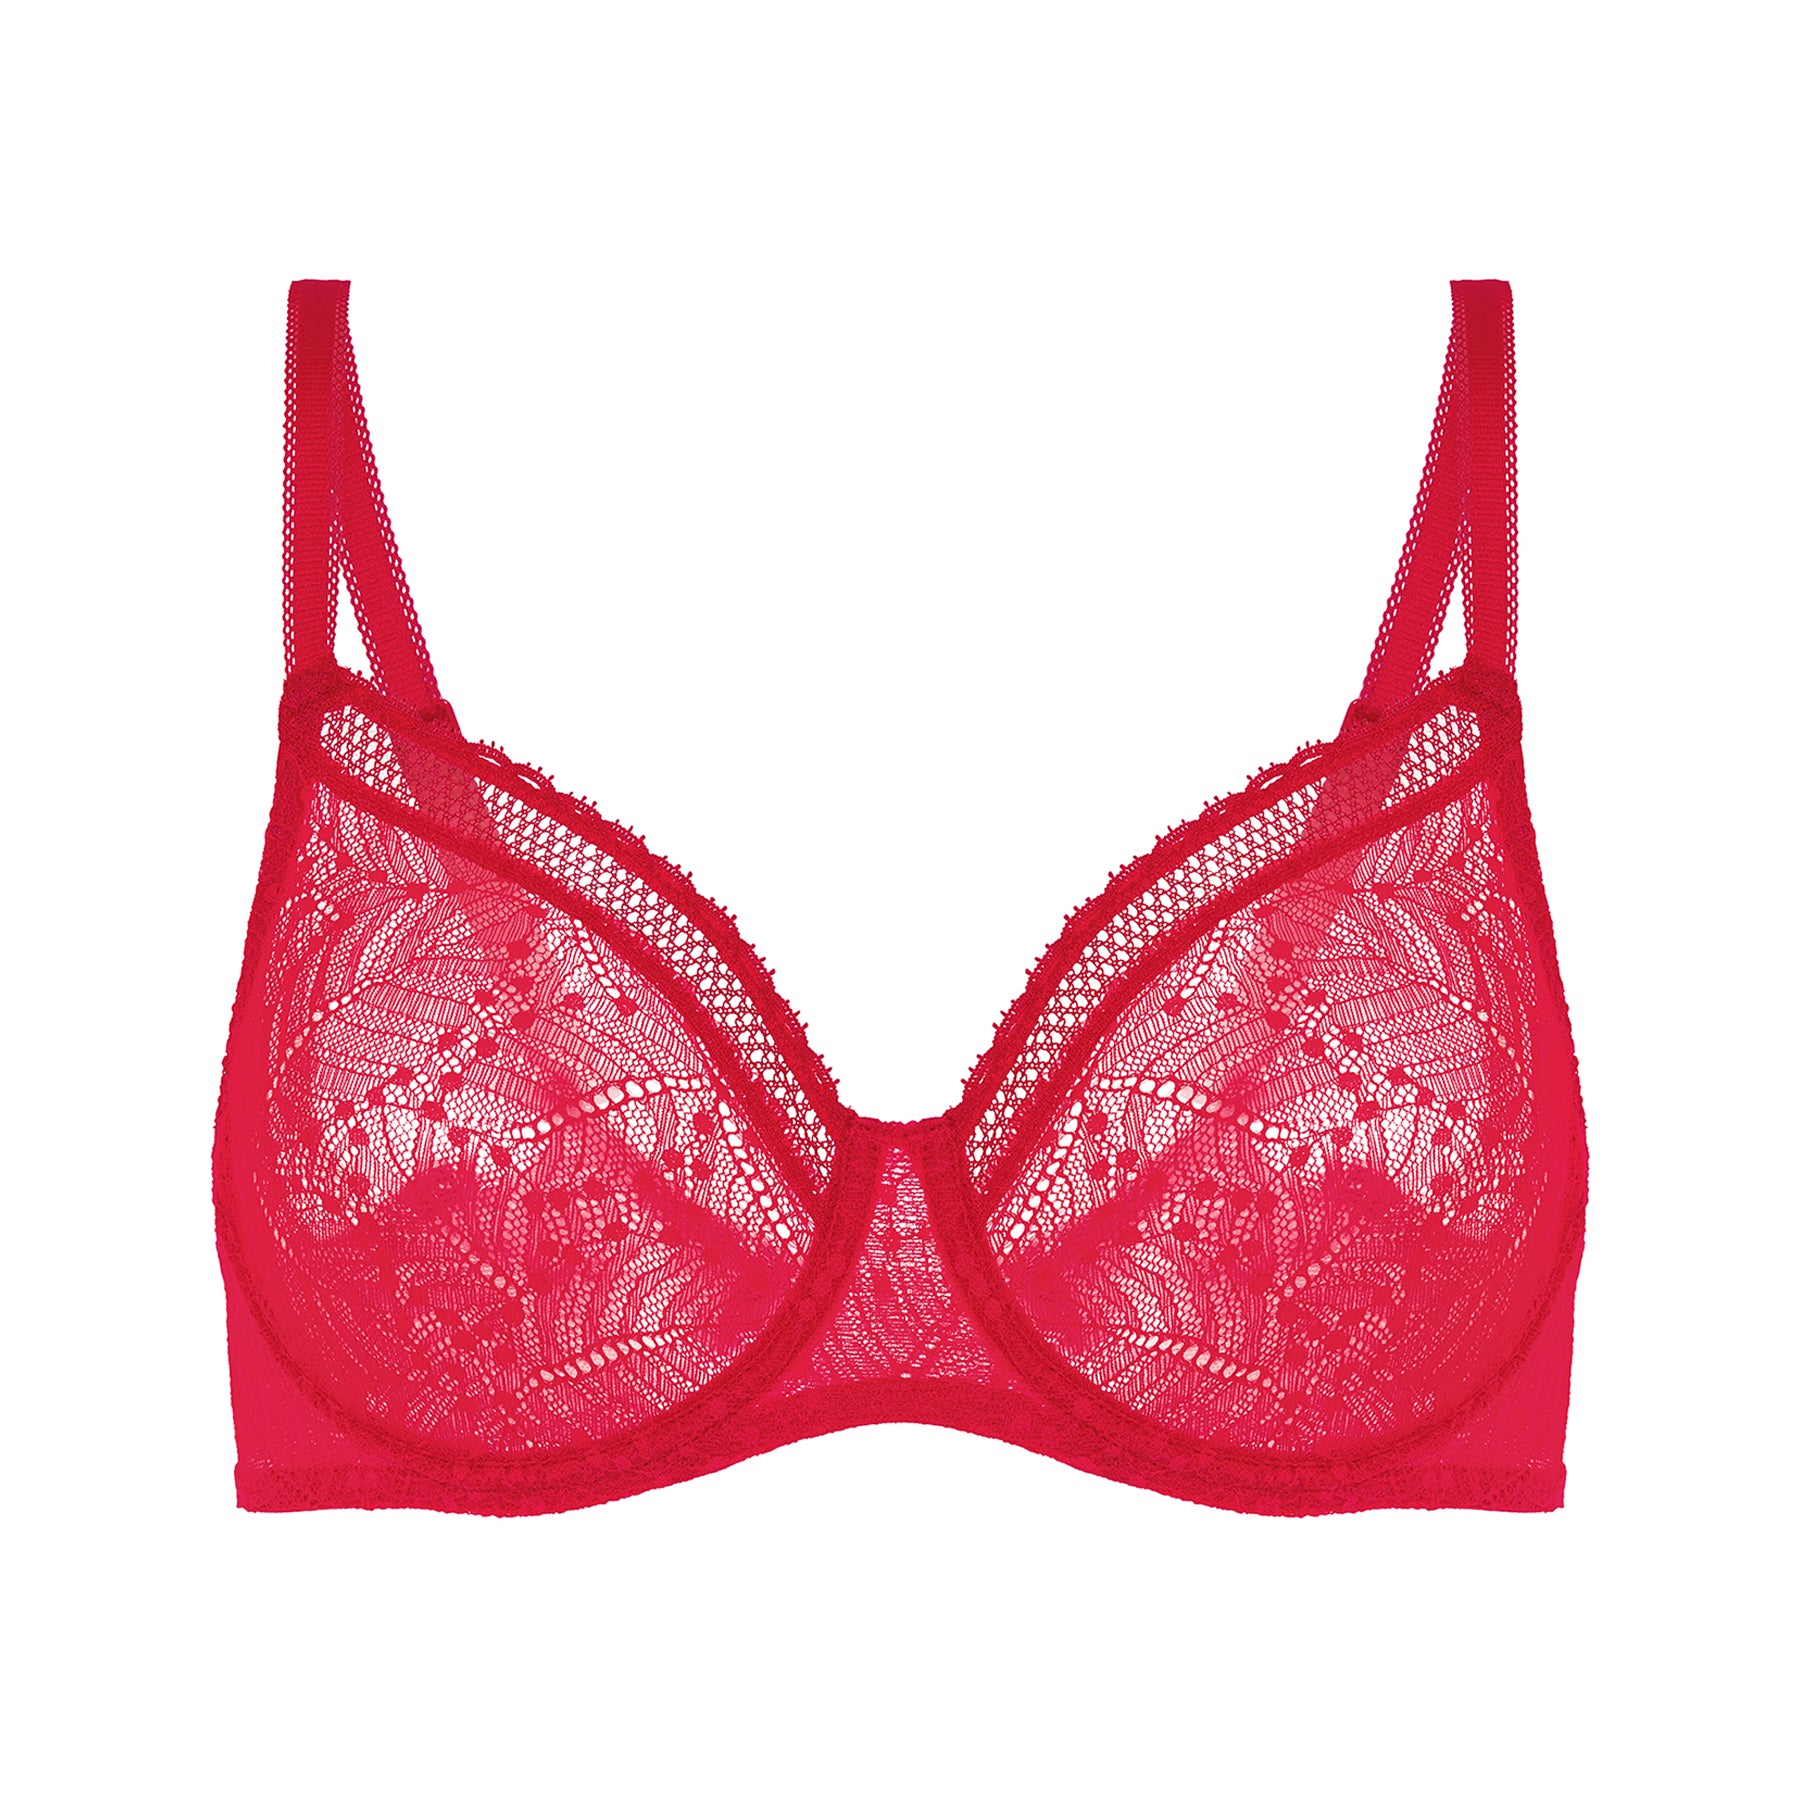 Inner Secrets Lingerie - Discover the iconic Simone Perele Saga style in an  intense red colour. Made with French embroidery and guipure, this exquisite  collection reveals a modern elegance and a glamorous